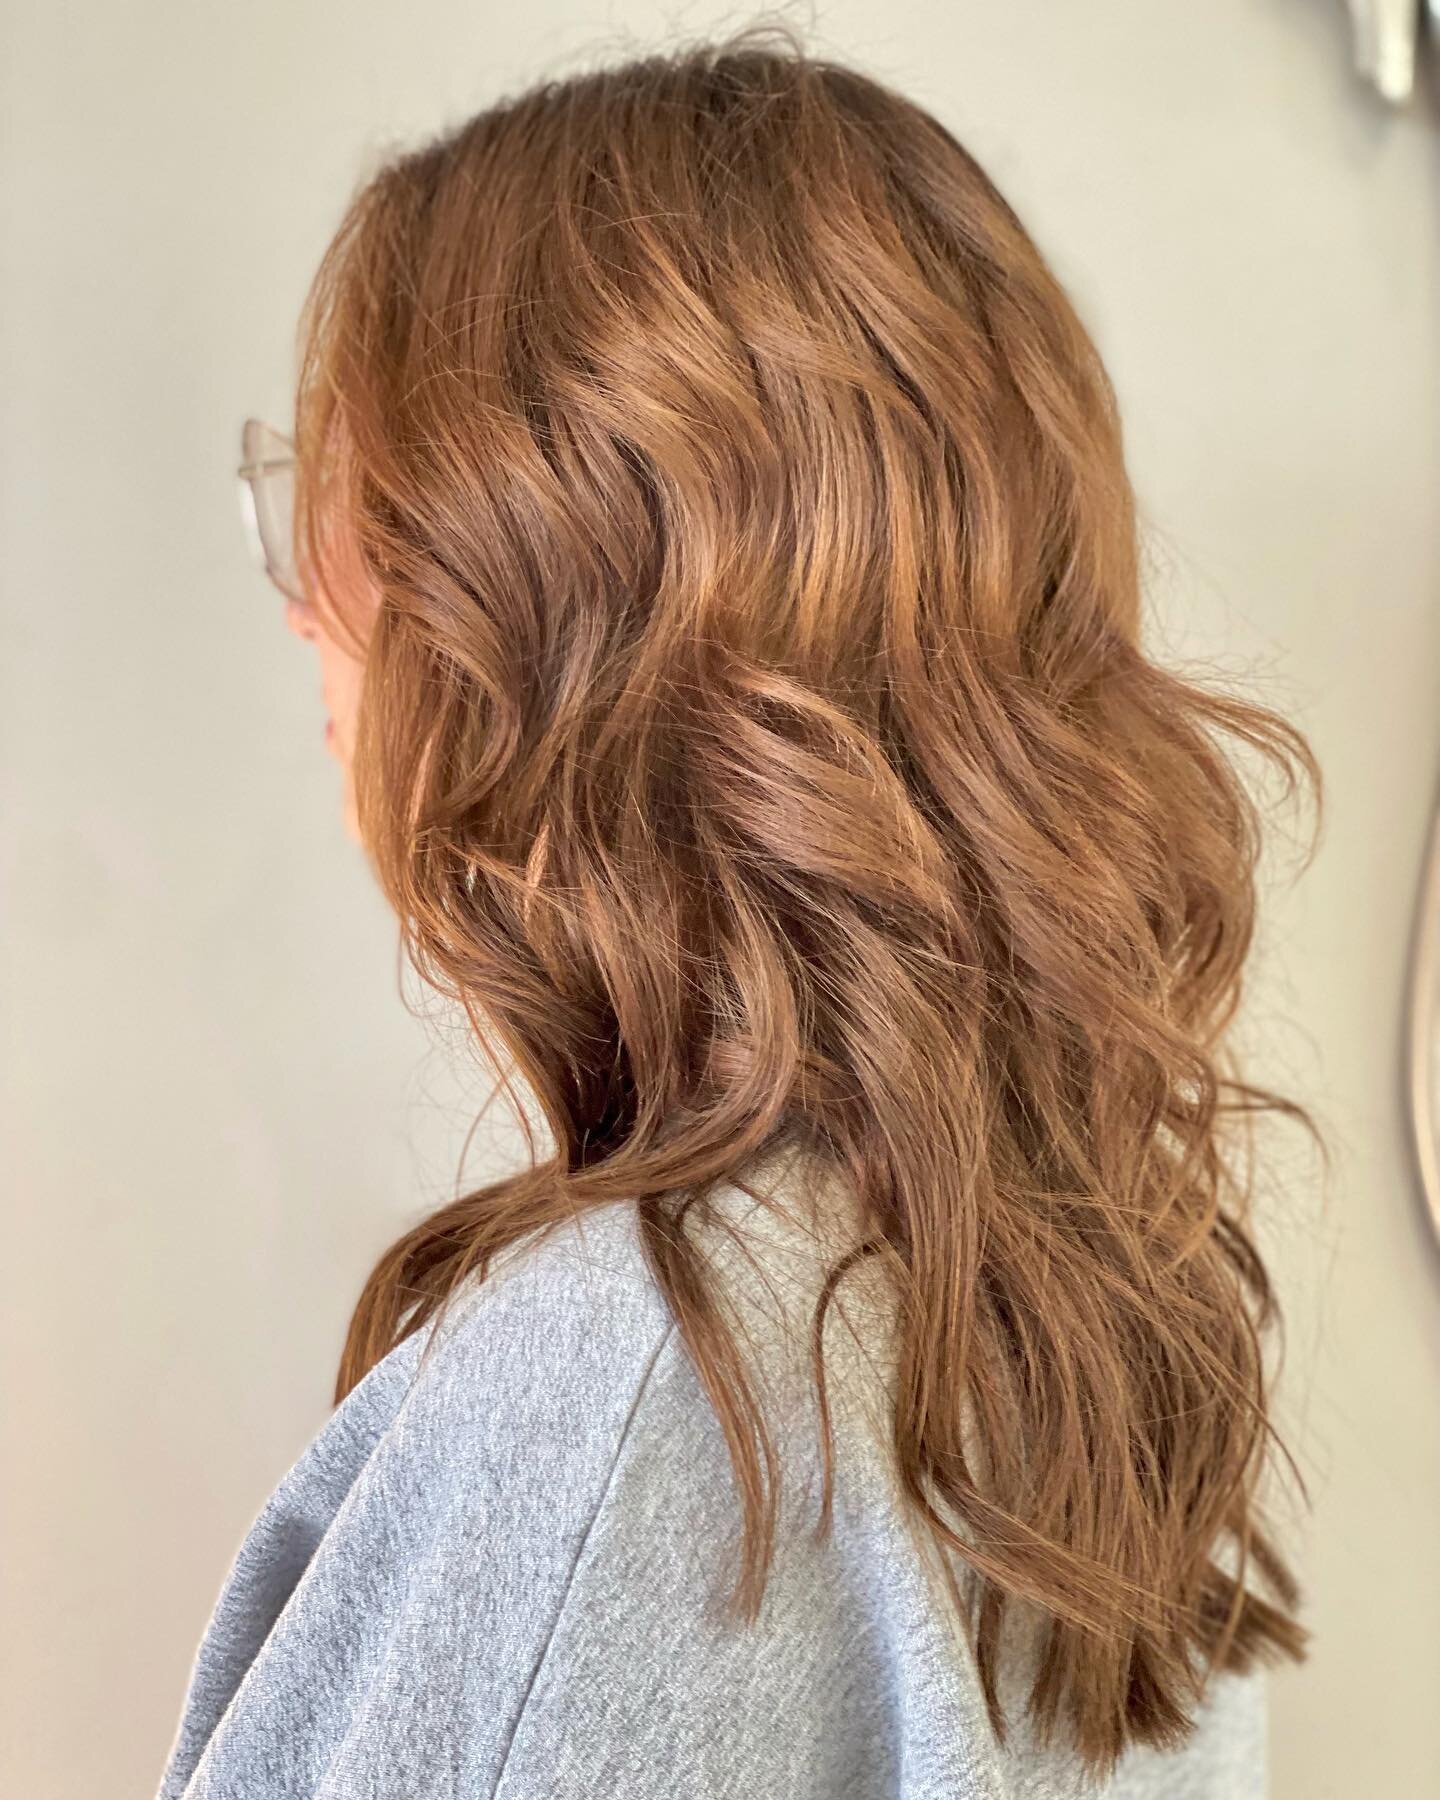 Halo tape in extensions done by @umadarling 🌻

#indianapolis #indianapolisindiana #carmelindiana #carmelindianastylist #indyhair #indyhairstylist #westfieldhair #broadripplehairtylist #indianapolishairstylist #broadripplehair #indy #fishershair #fis